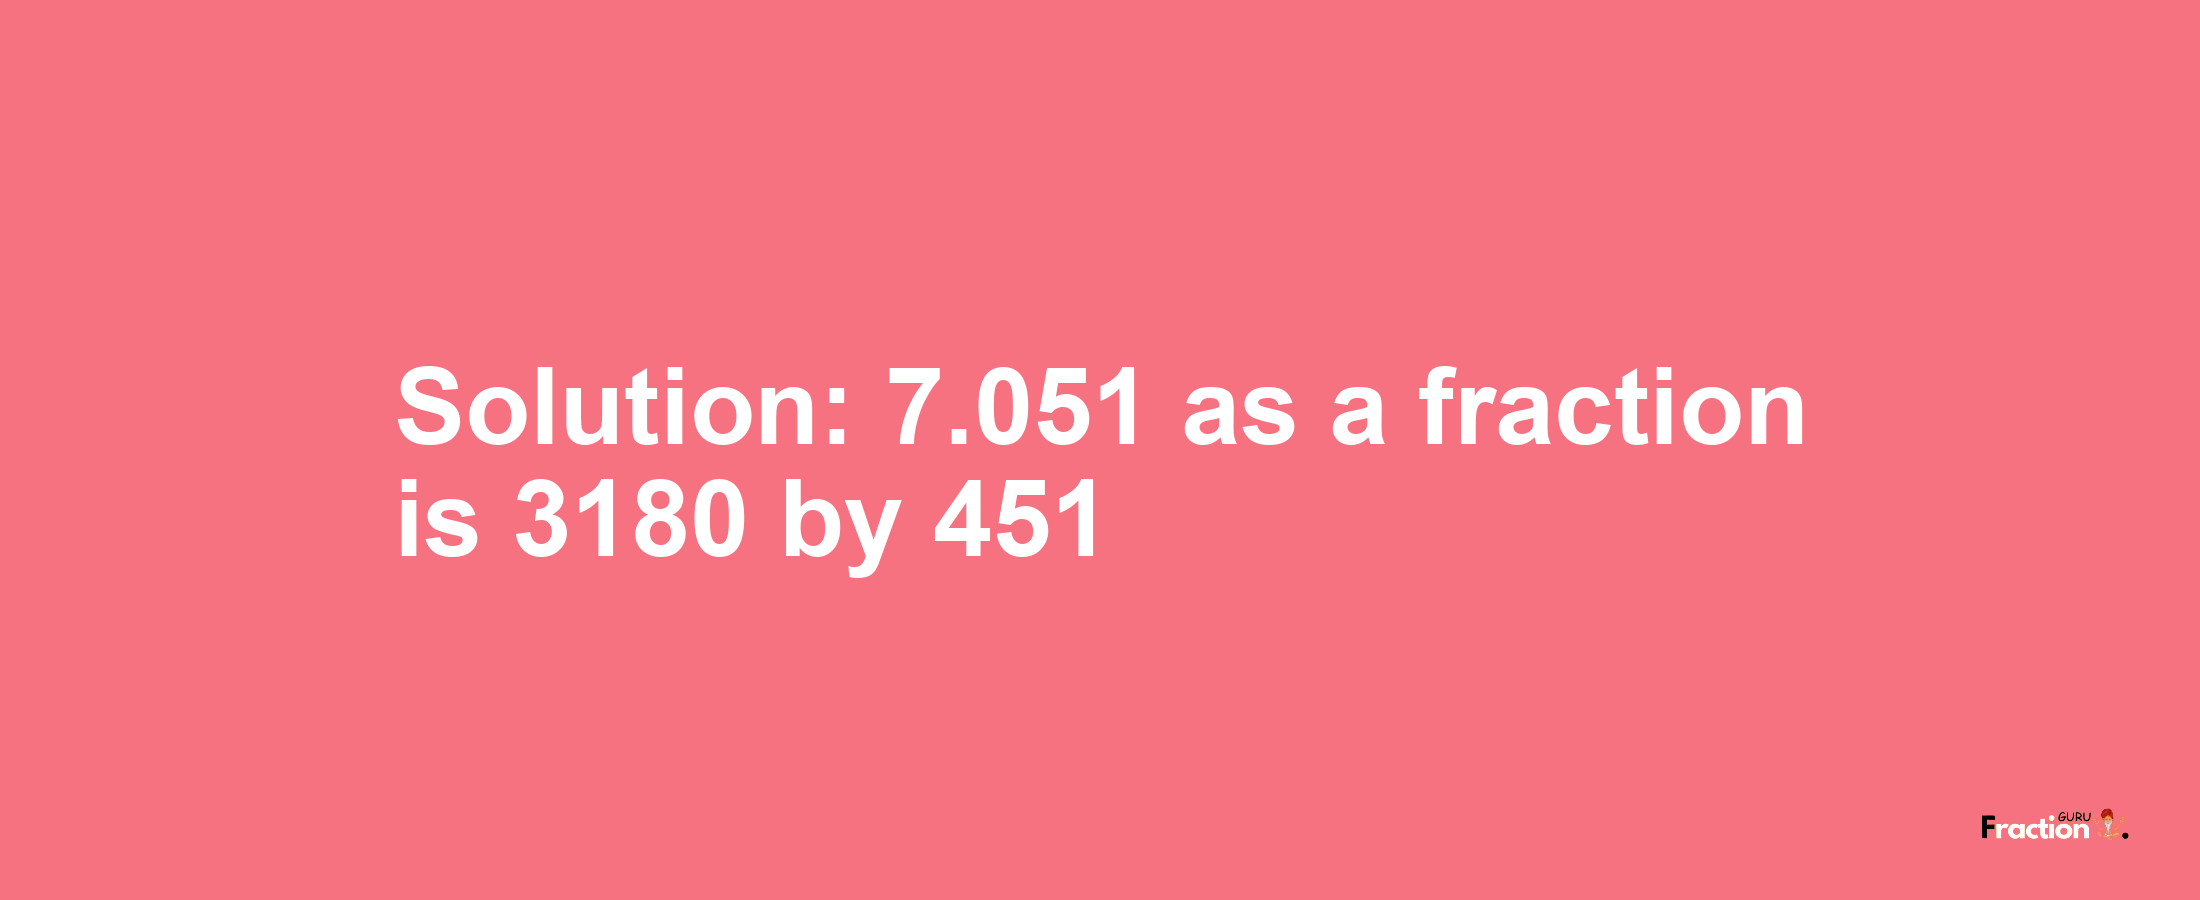 Solution:7.051 as a fraction is 3180/451